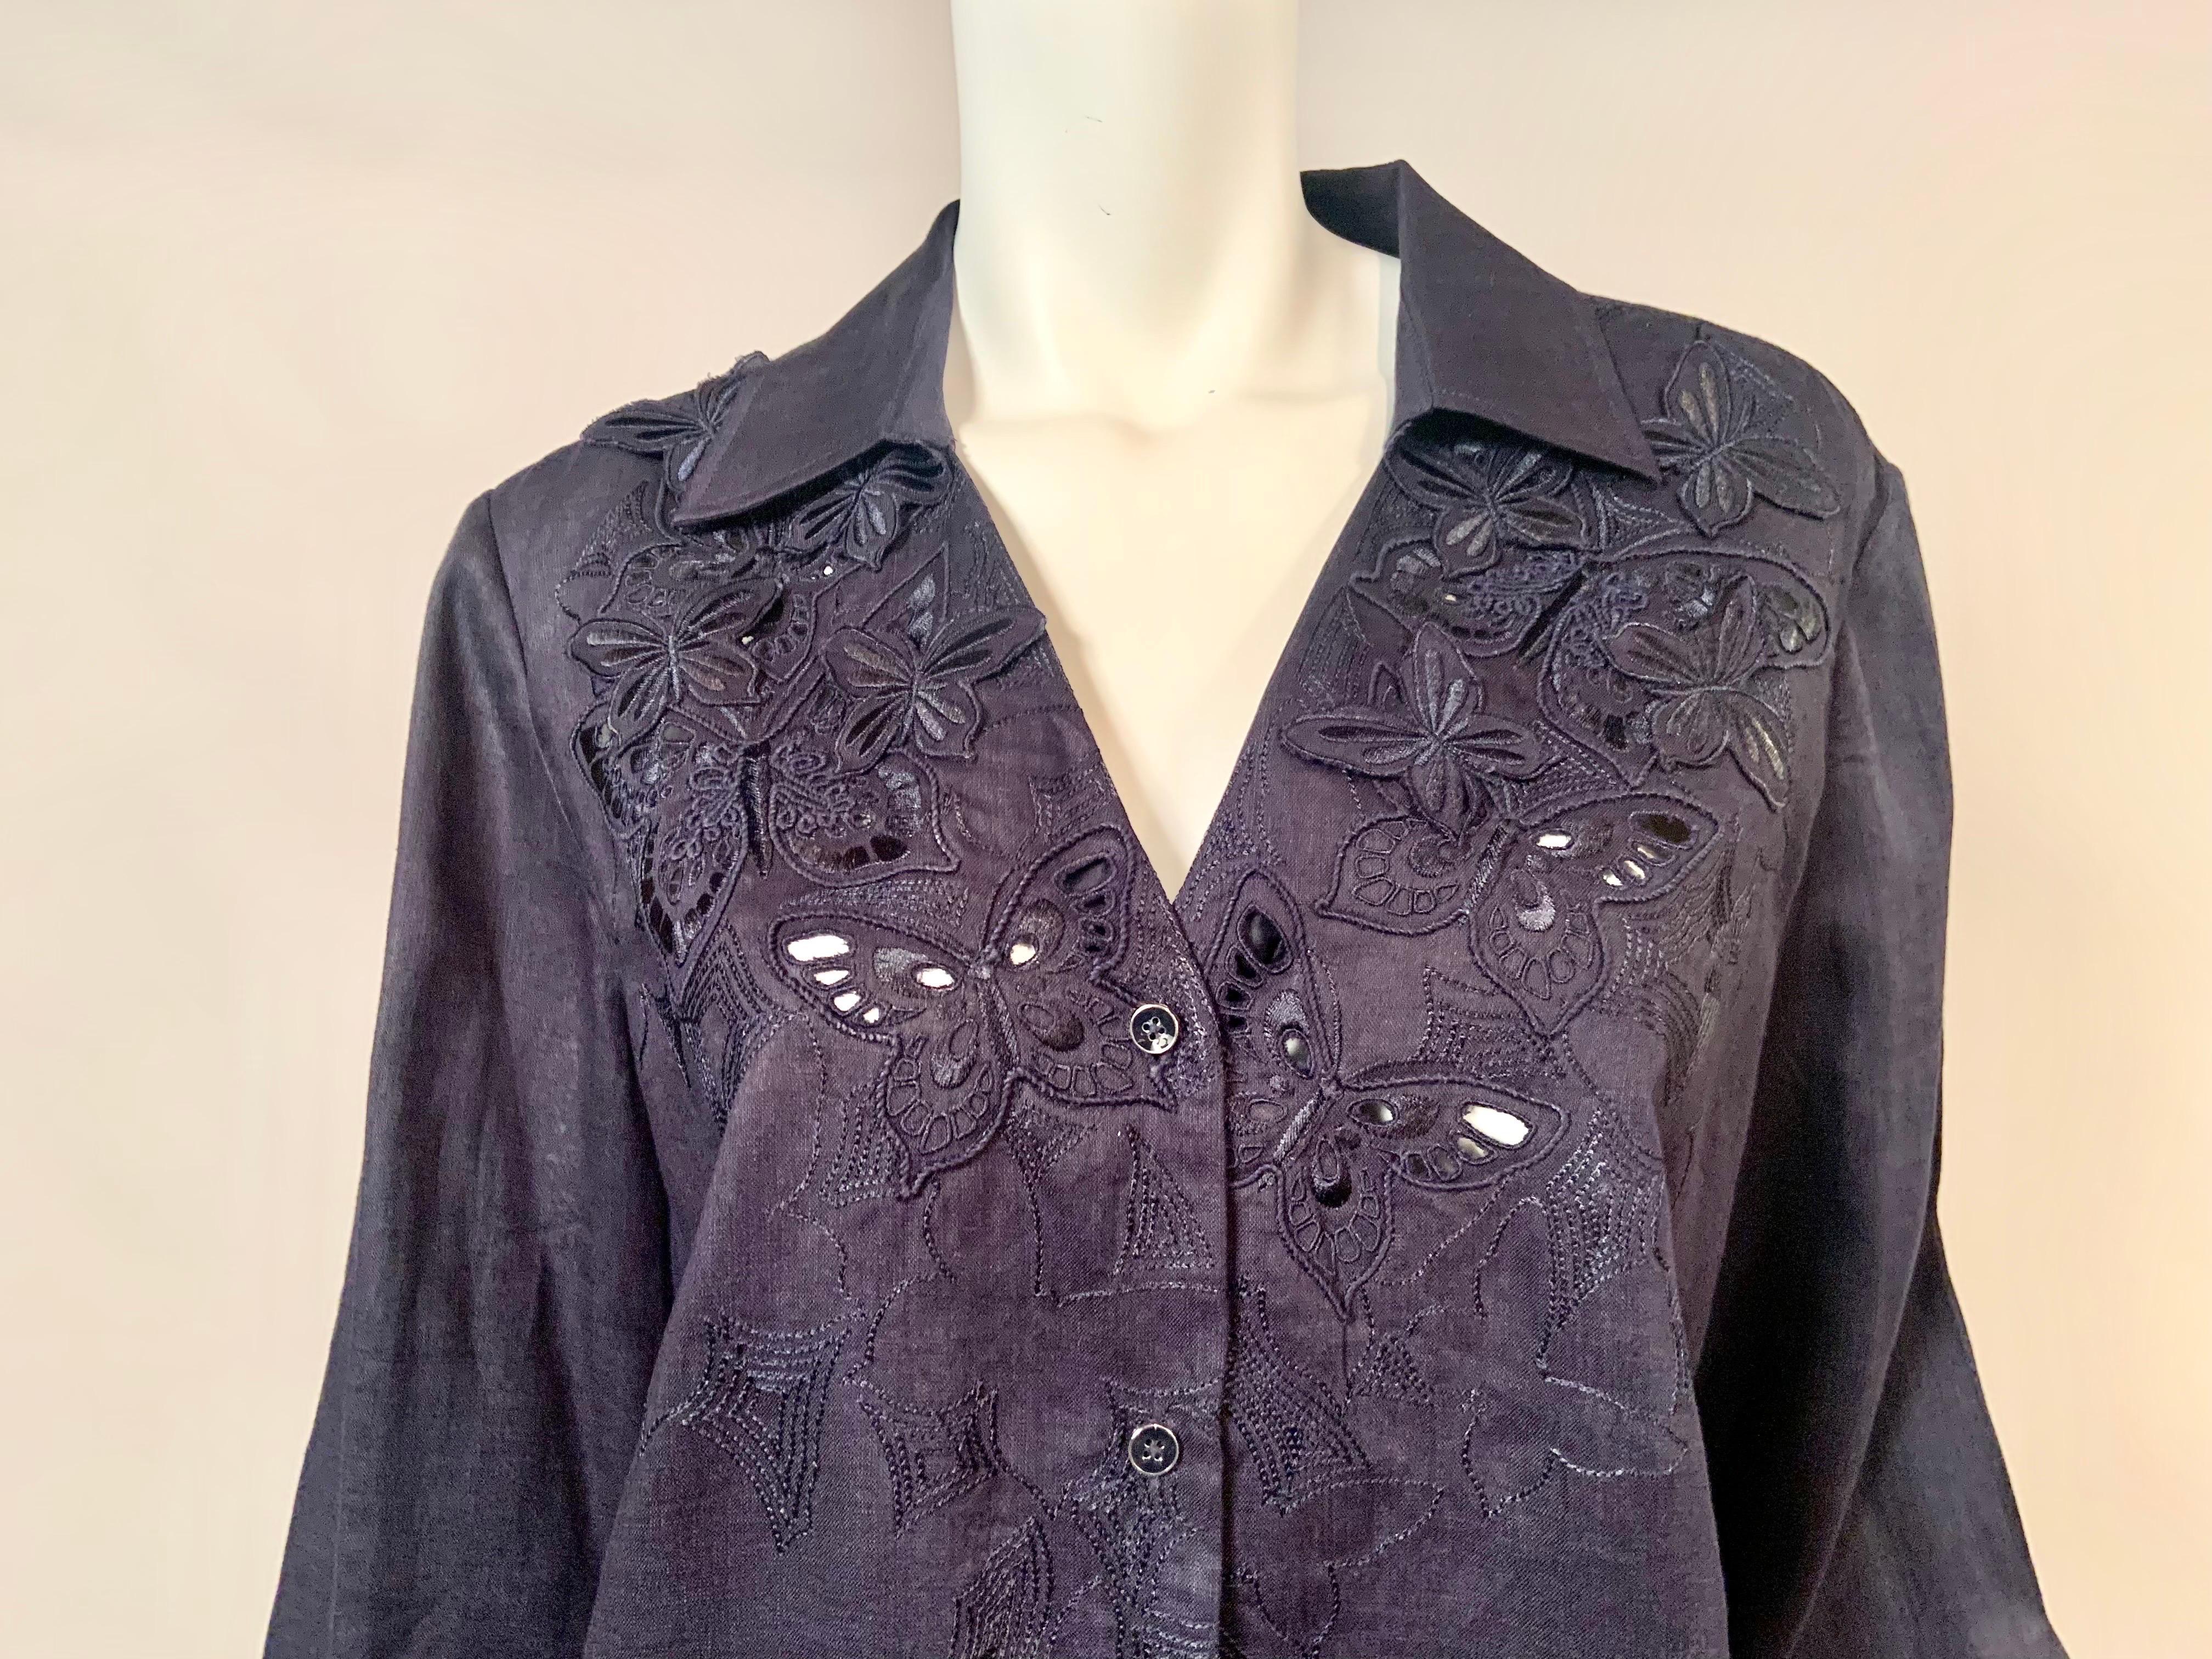 This beautiful blouse from German designer Rena Lange has stunning cut work with floral embroidery and embroidered butterfly appliques. This extends to the third button at the center front.  The shirt has long sleeves with button cuffs, and a yoke